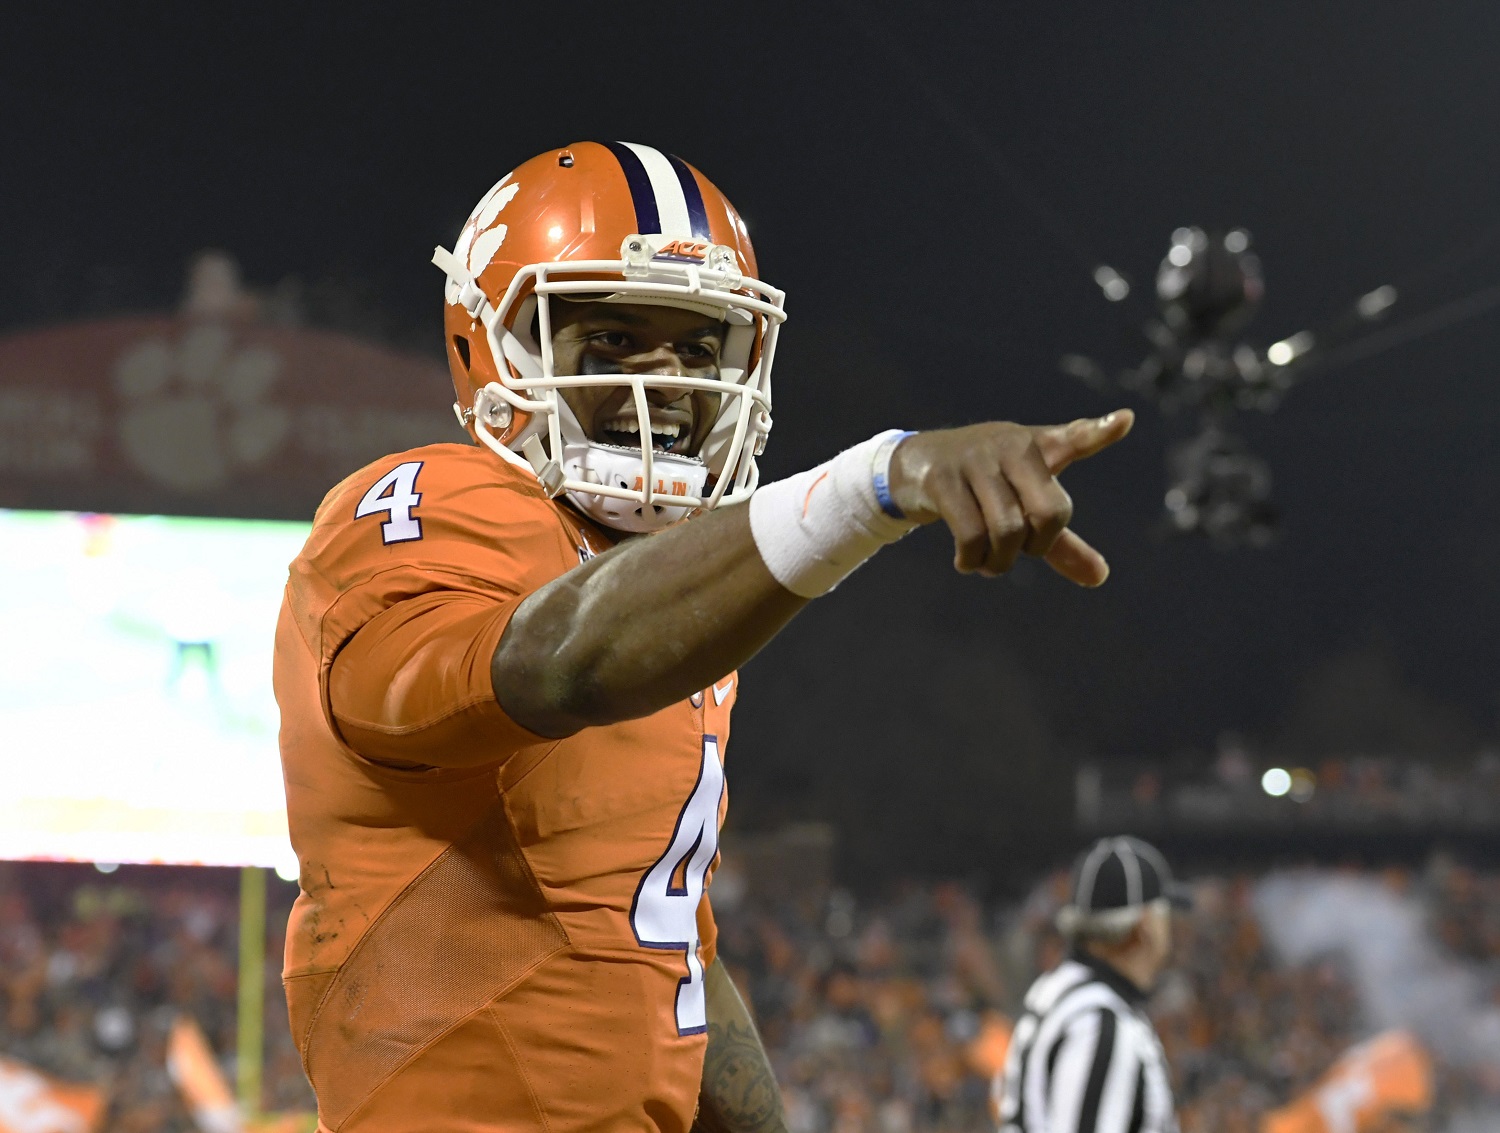 FILE - In this Nov. 26, 2016, file photo, Clemson quarterback Deshaun Watson reacts after throwing a touchdown pass to Artavis Scott during the second half of an NCAA college football game against South Carolina, in Clemson, S.C. Lamar Jackson stumbled down the stretch, leaving the rest of the field one last chance to catch him in the Heisman Trophy race. (AP Photo/Richard Shiro, File)